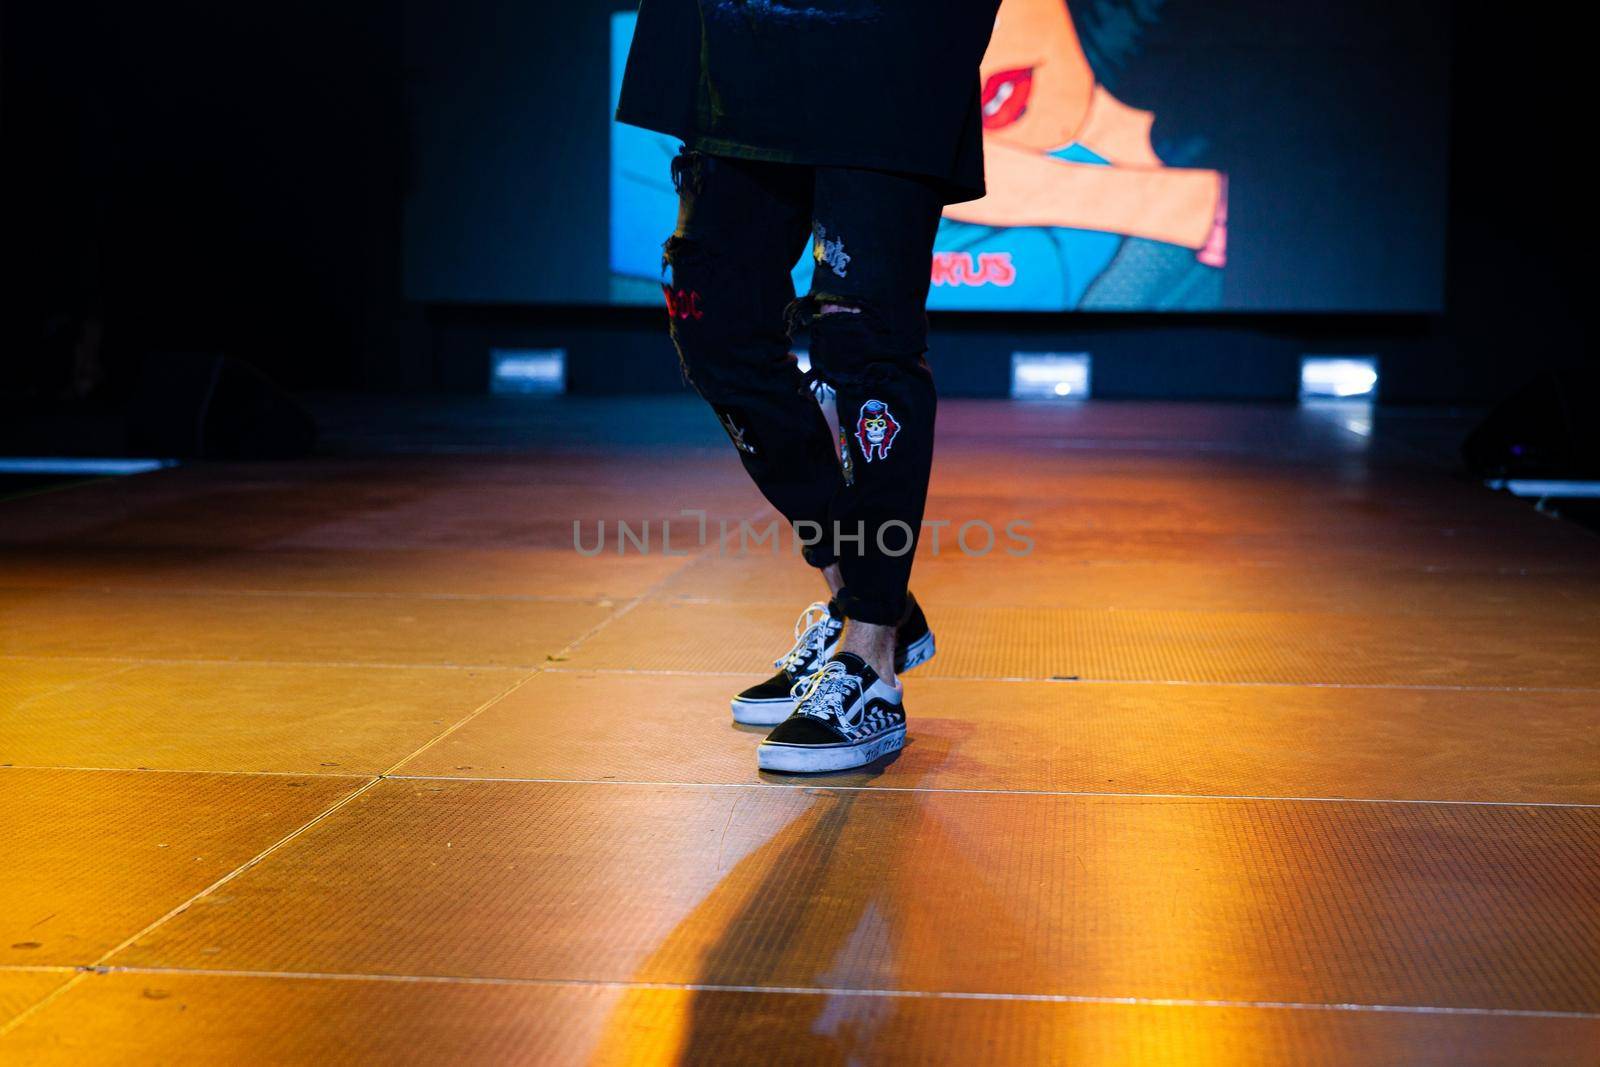 Close-up of the artist's legs during a performance . High quality photo